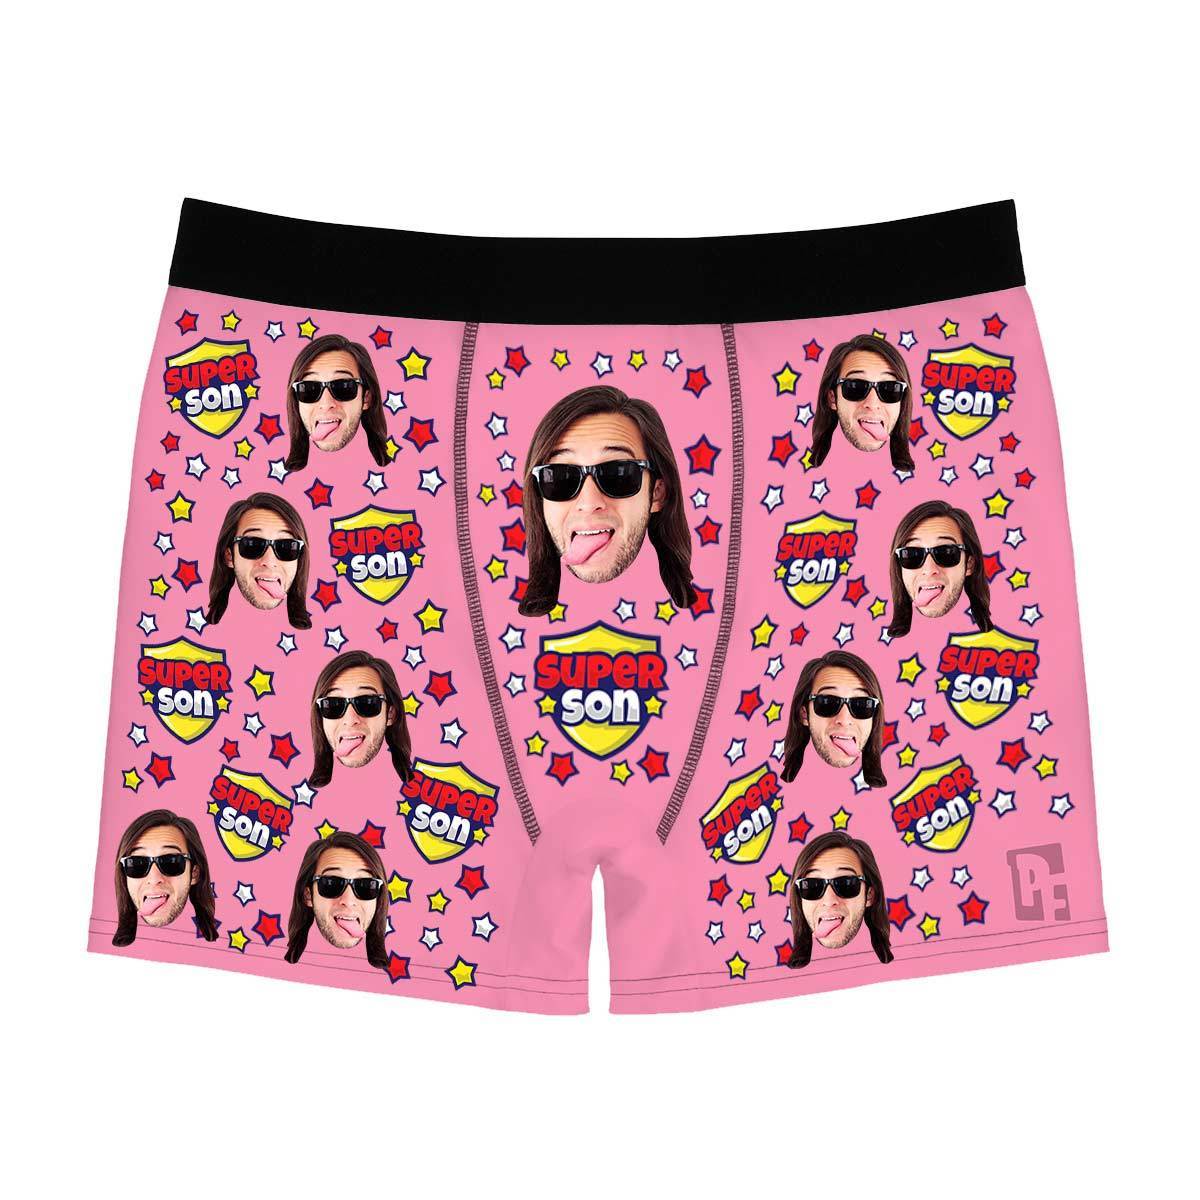 Pink Super son men's boxer briefs personalized with photo printed on them